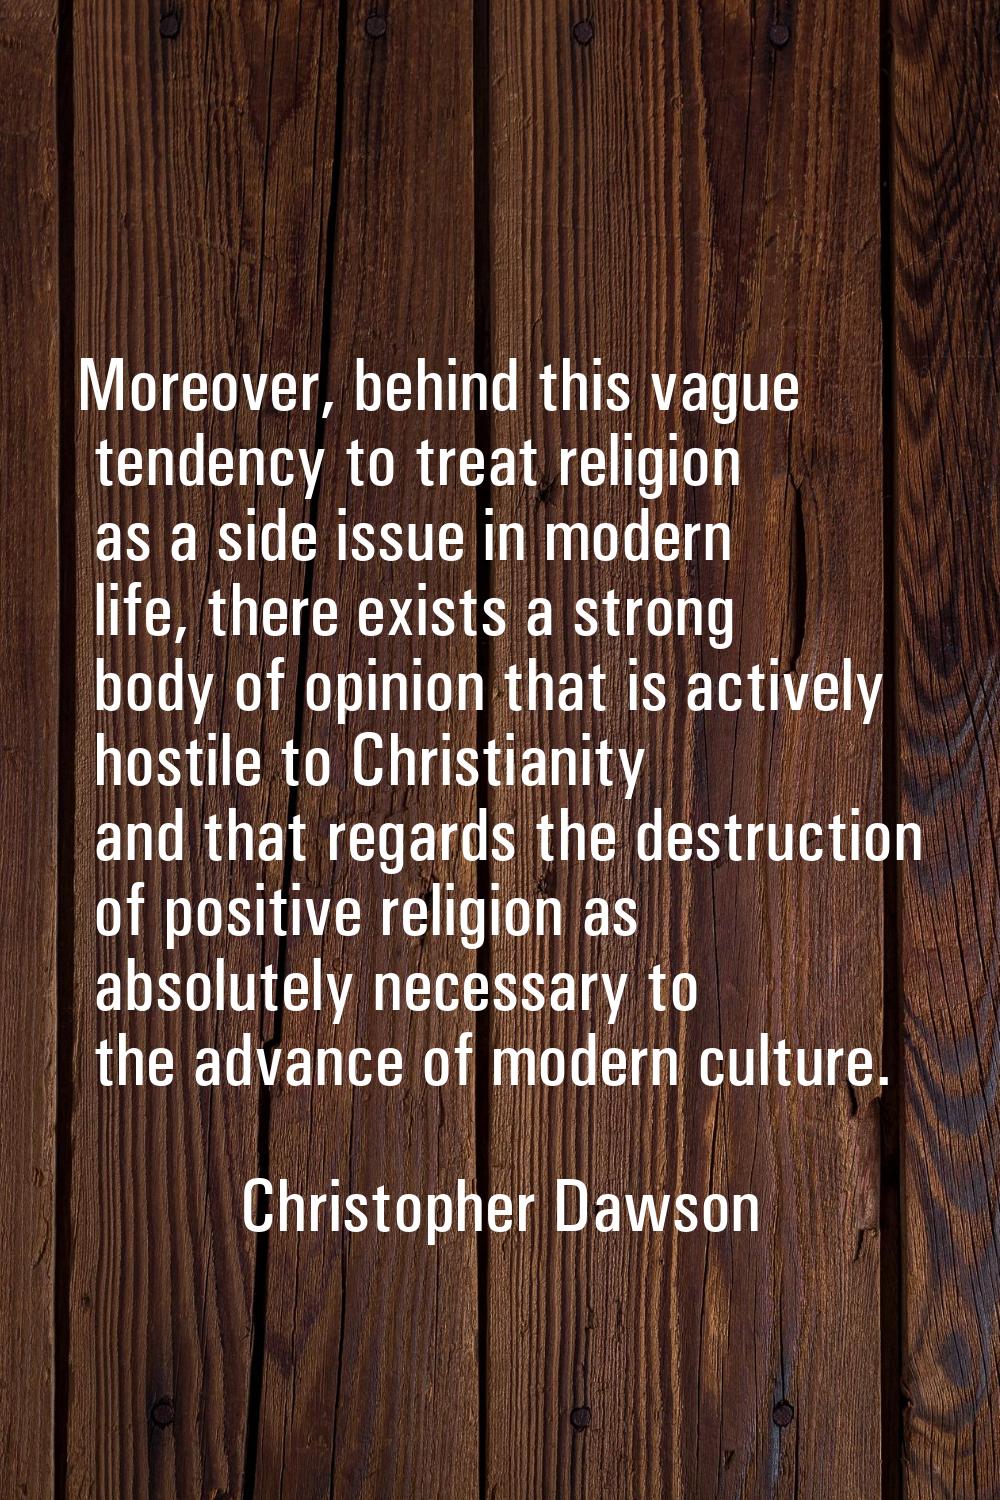 Moreover, behind this vague tendency to treat religion as a side issue in modern life, there exists